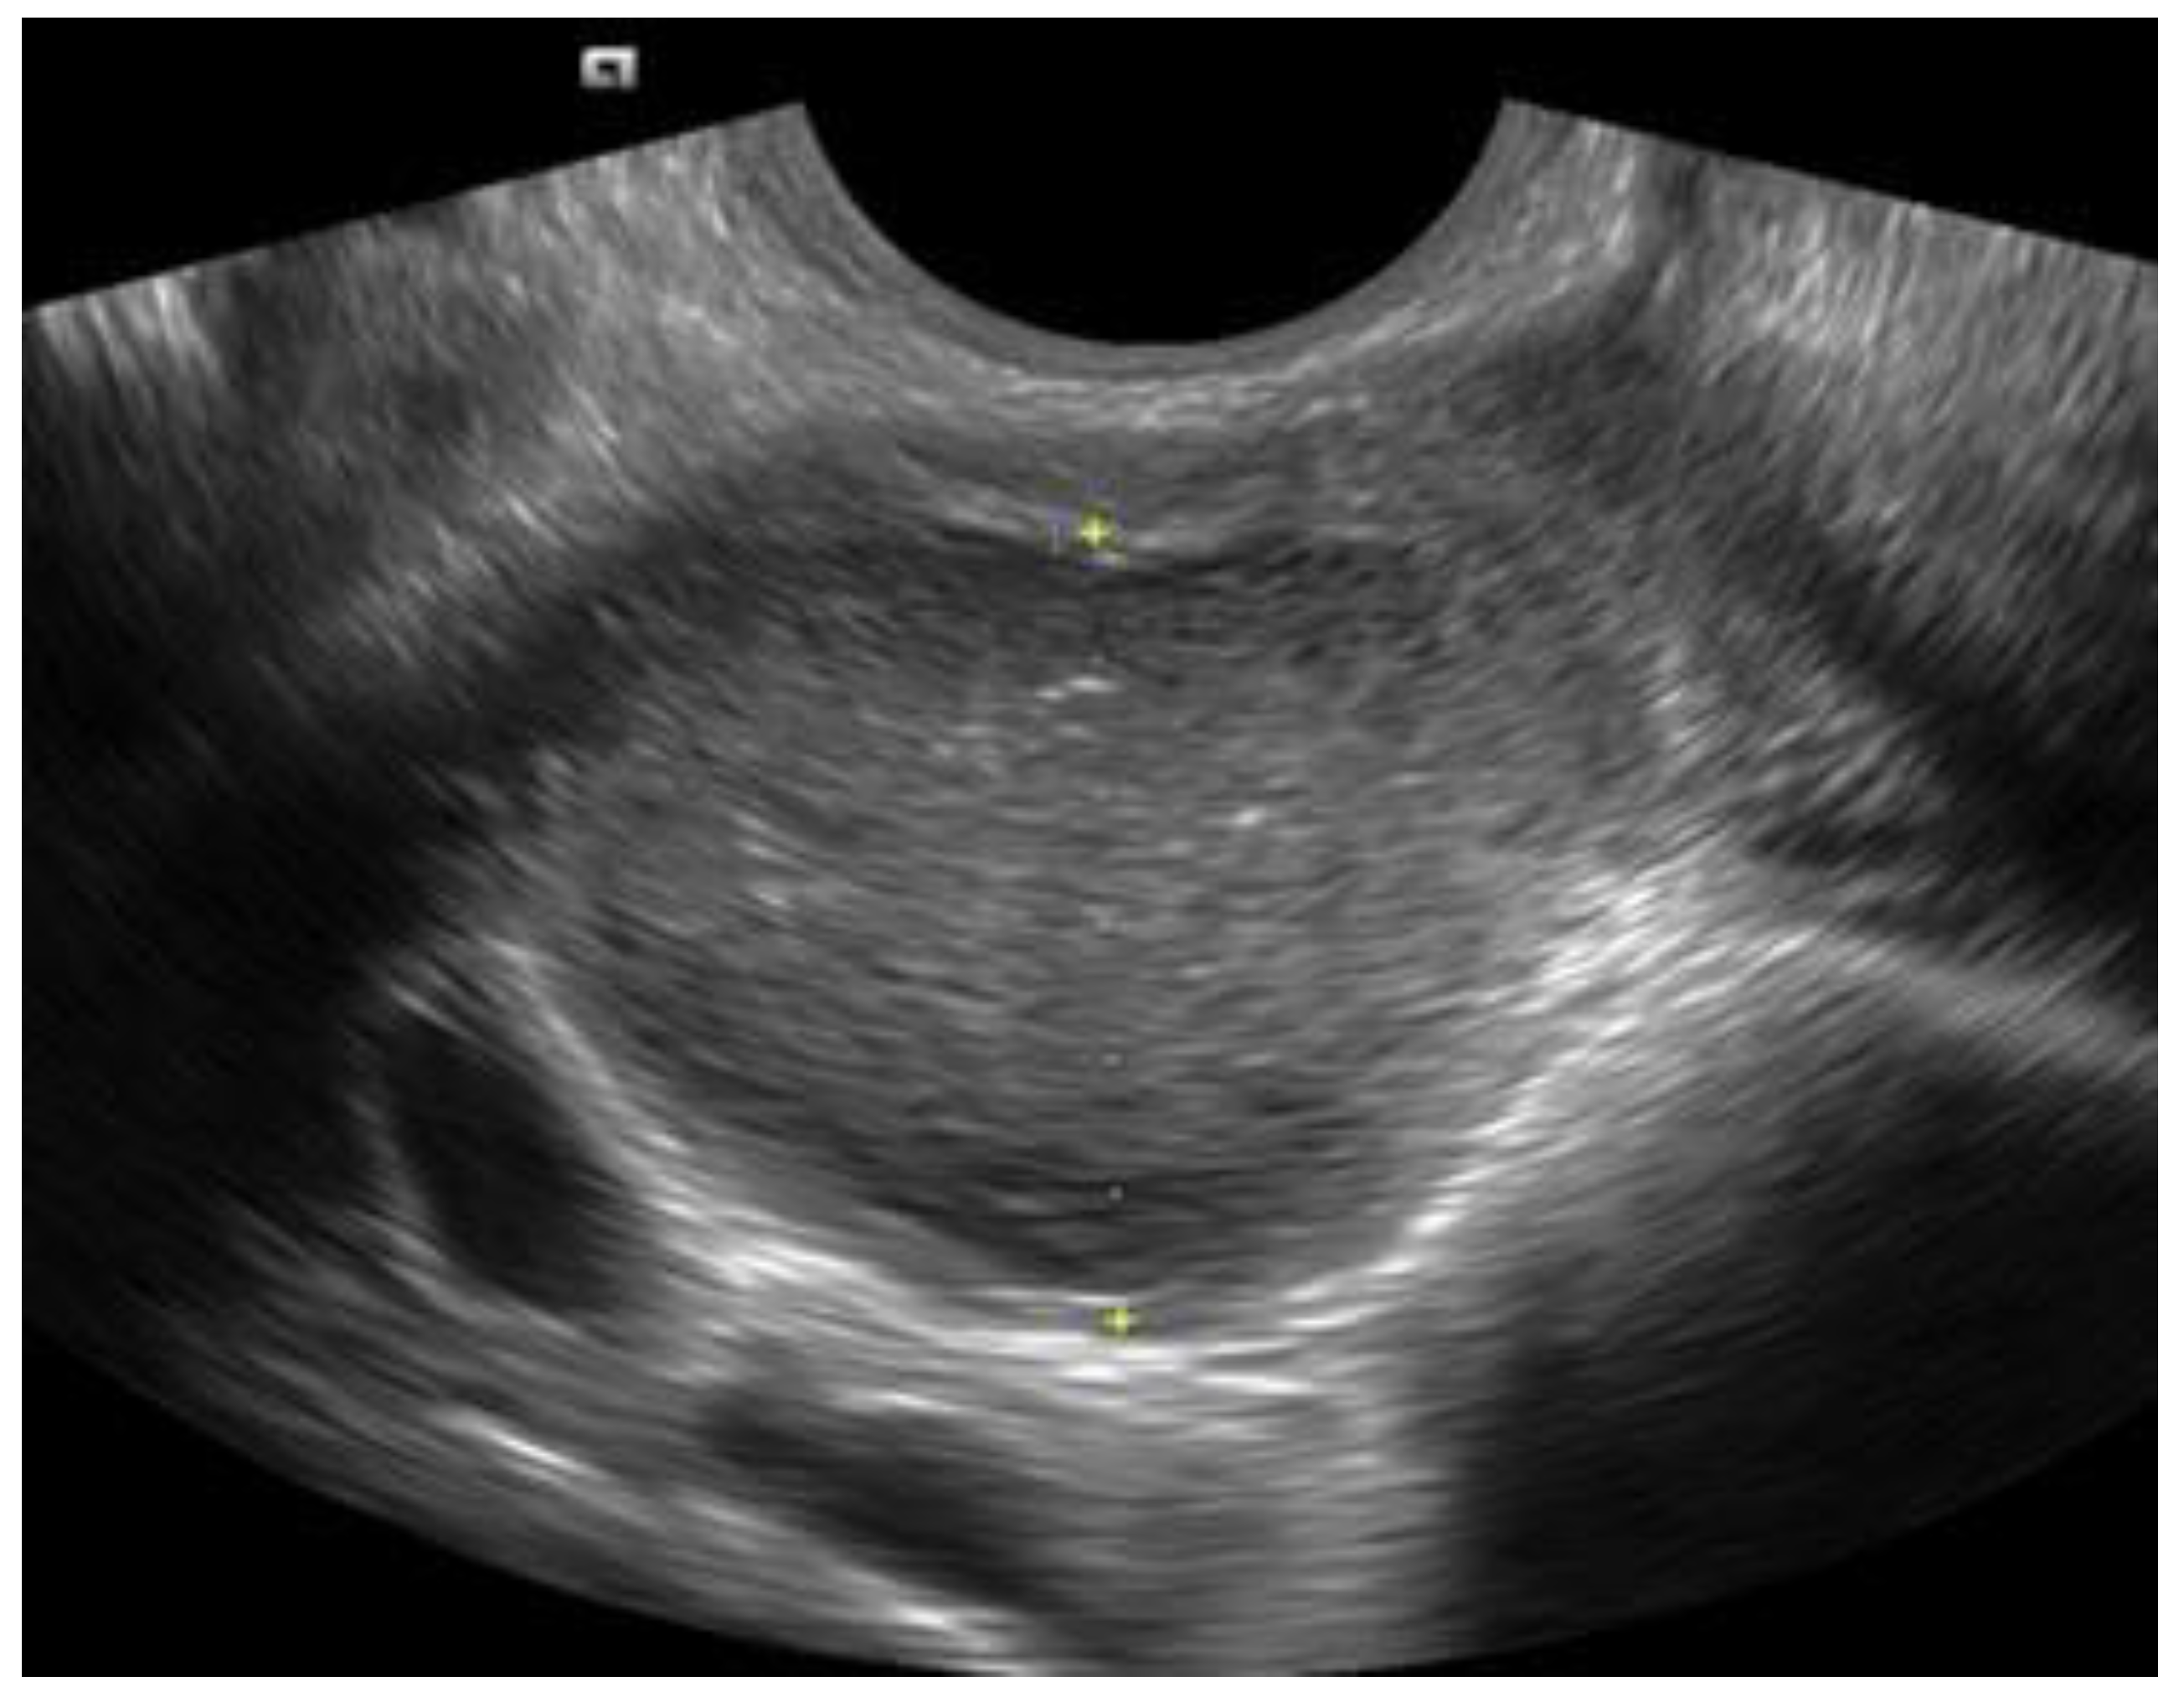 Diagnostics | Free Full-Text | Ultrasound in the and of Endometriosis&mdash;An Overview: Why, and When